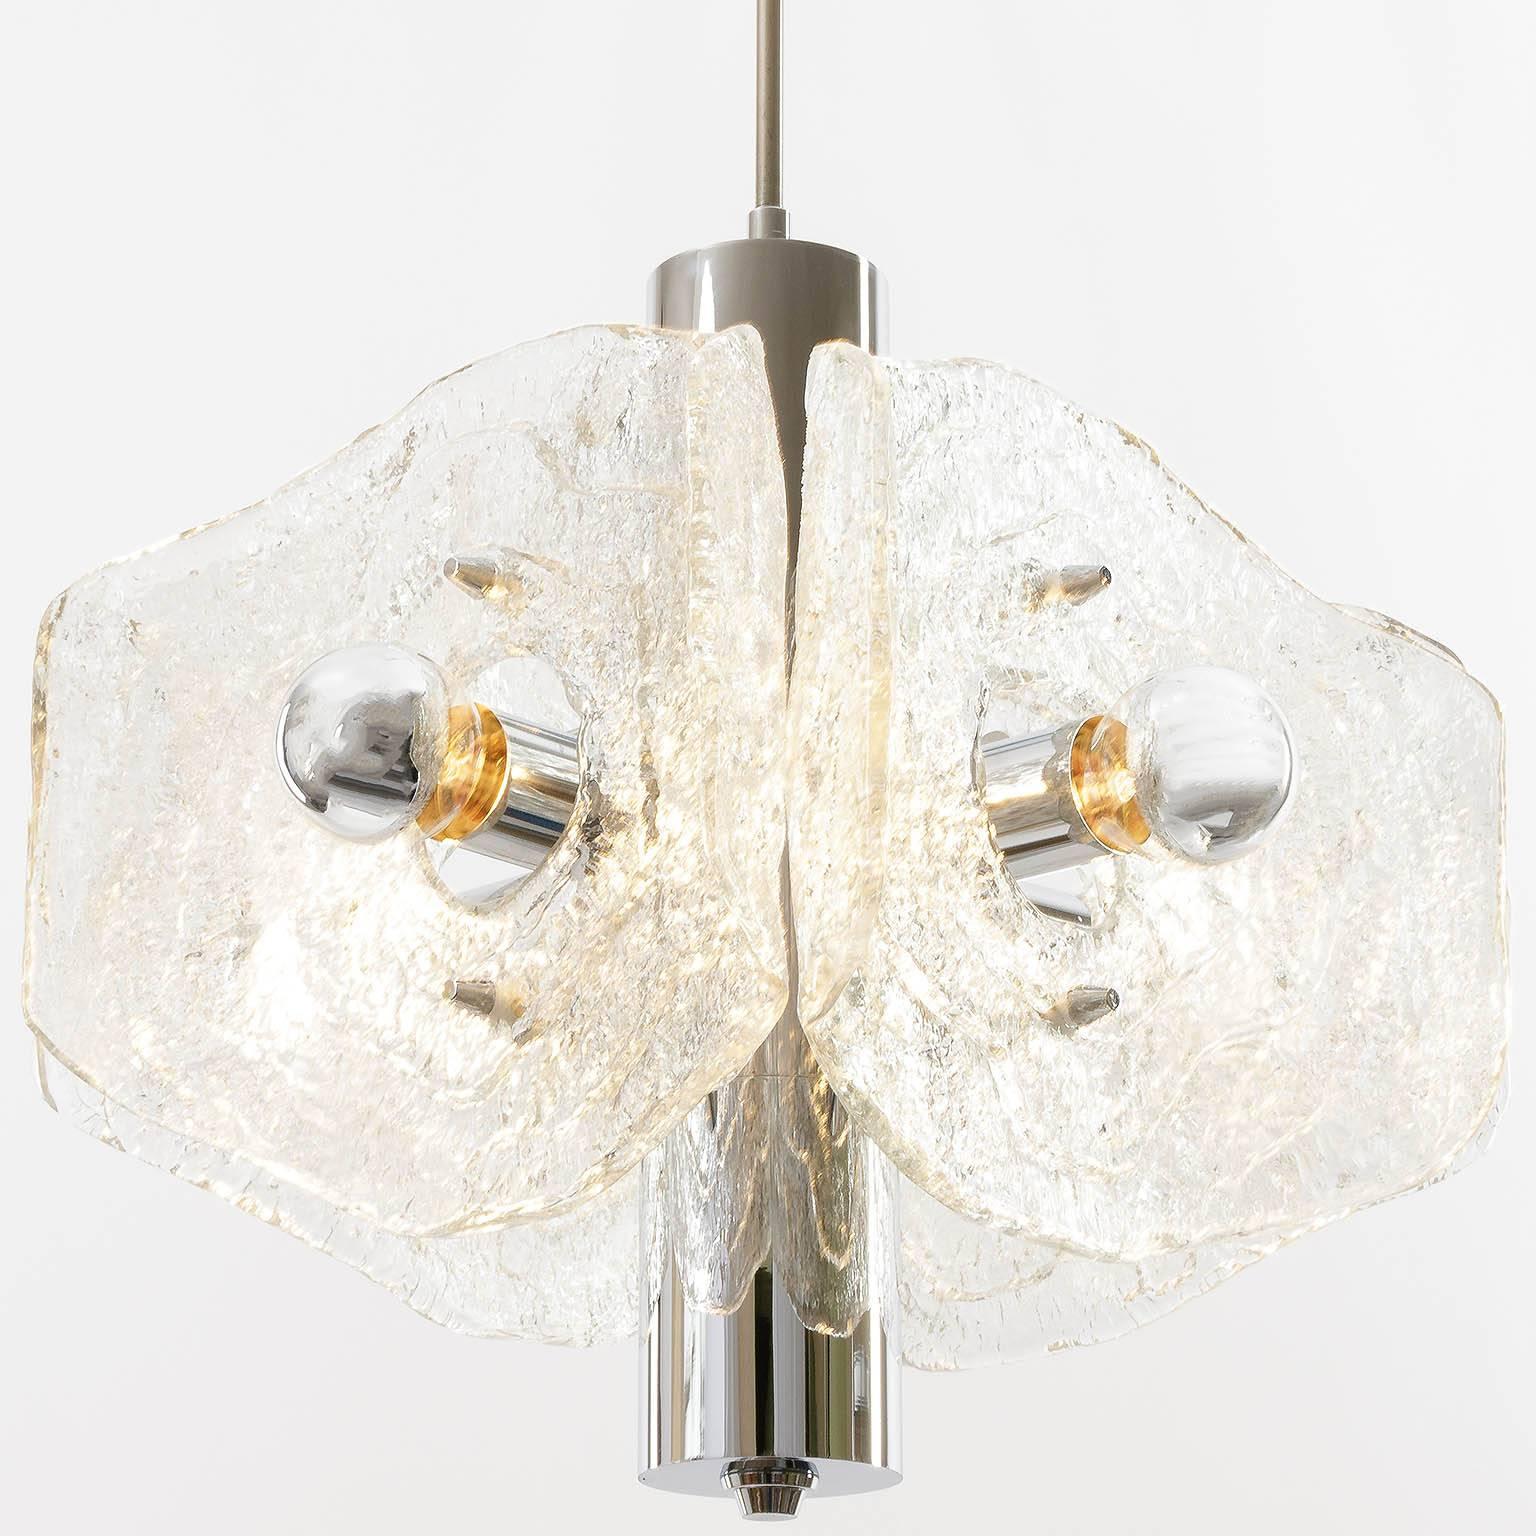 Late 20th Century Mid-Century Modern Chandelier, Chrome and Murano Glass, 1970s For Sale